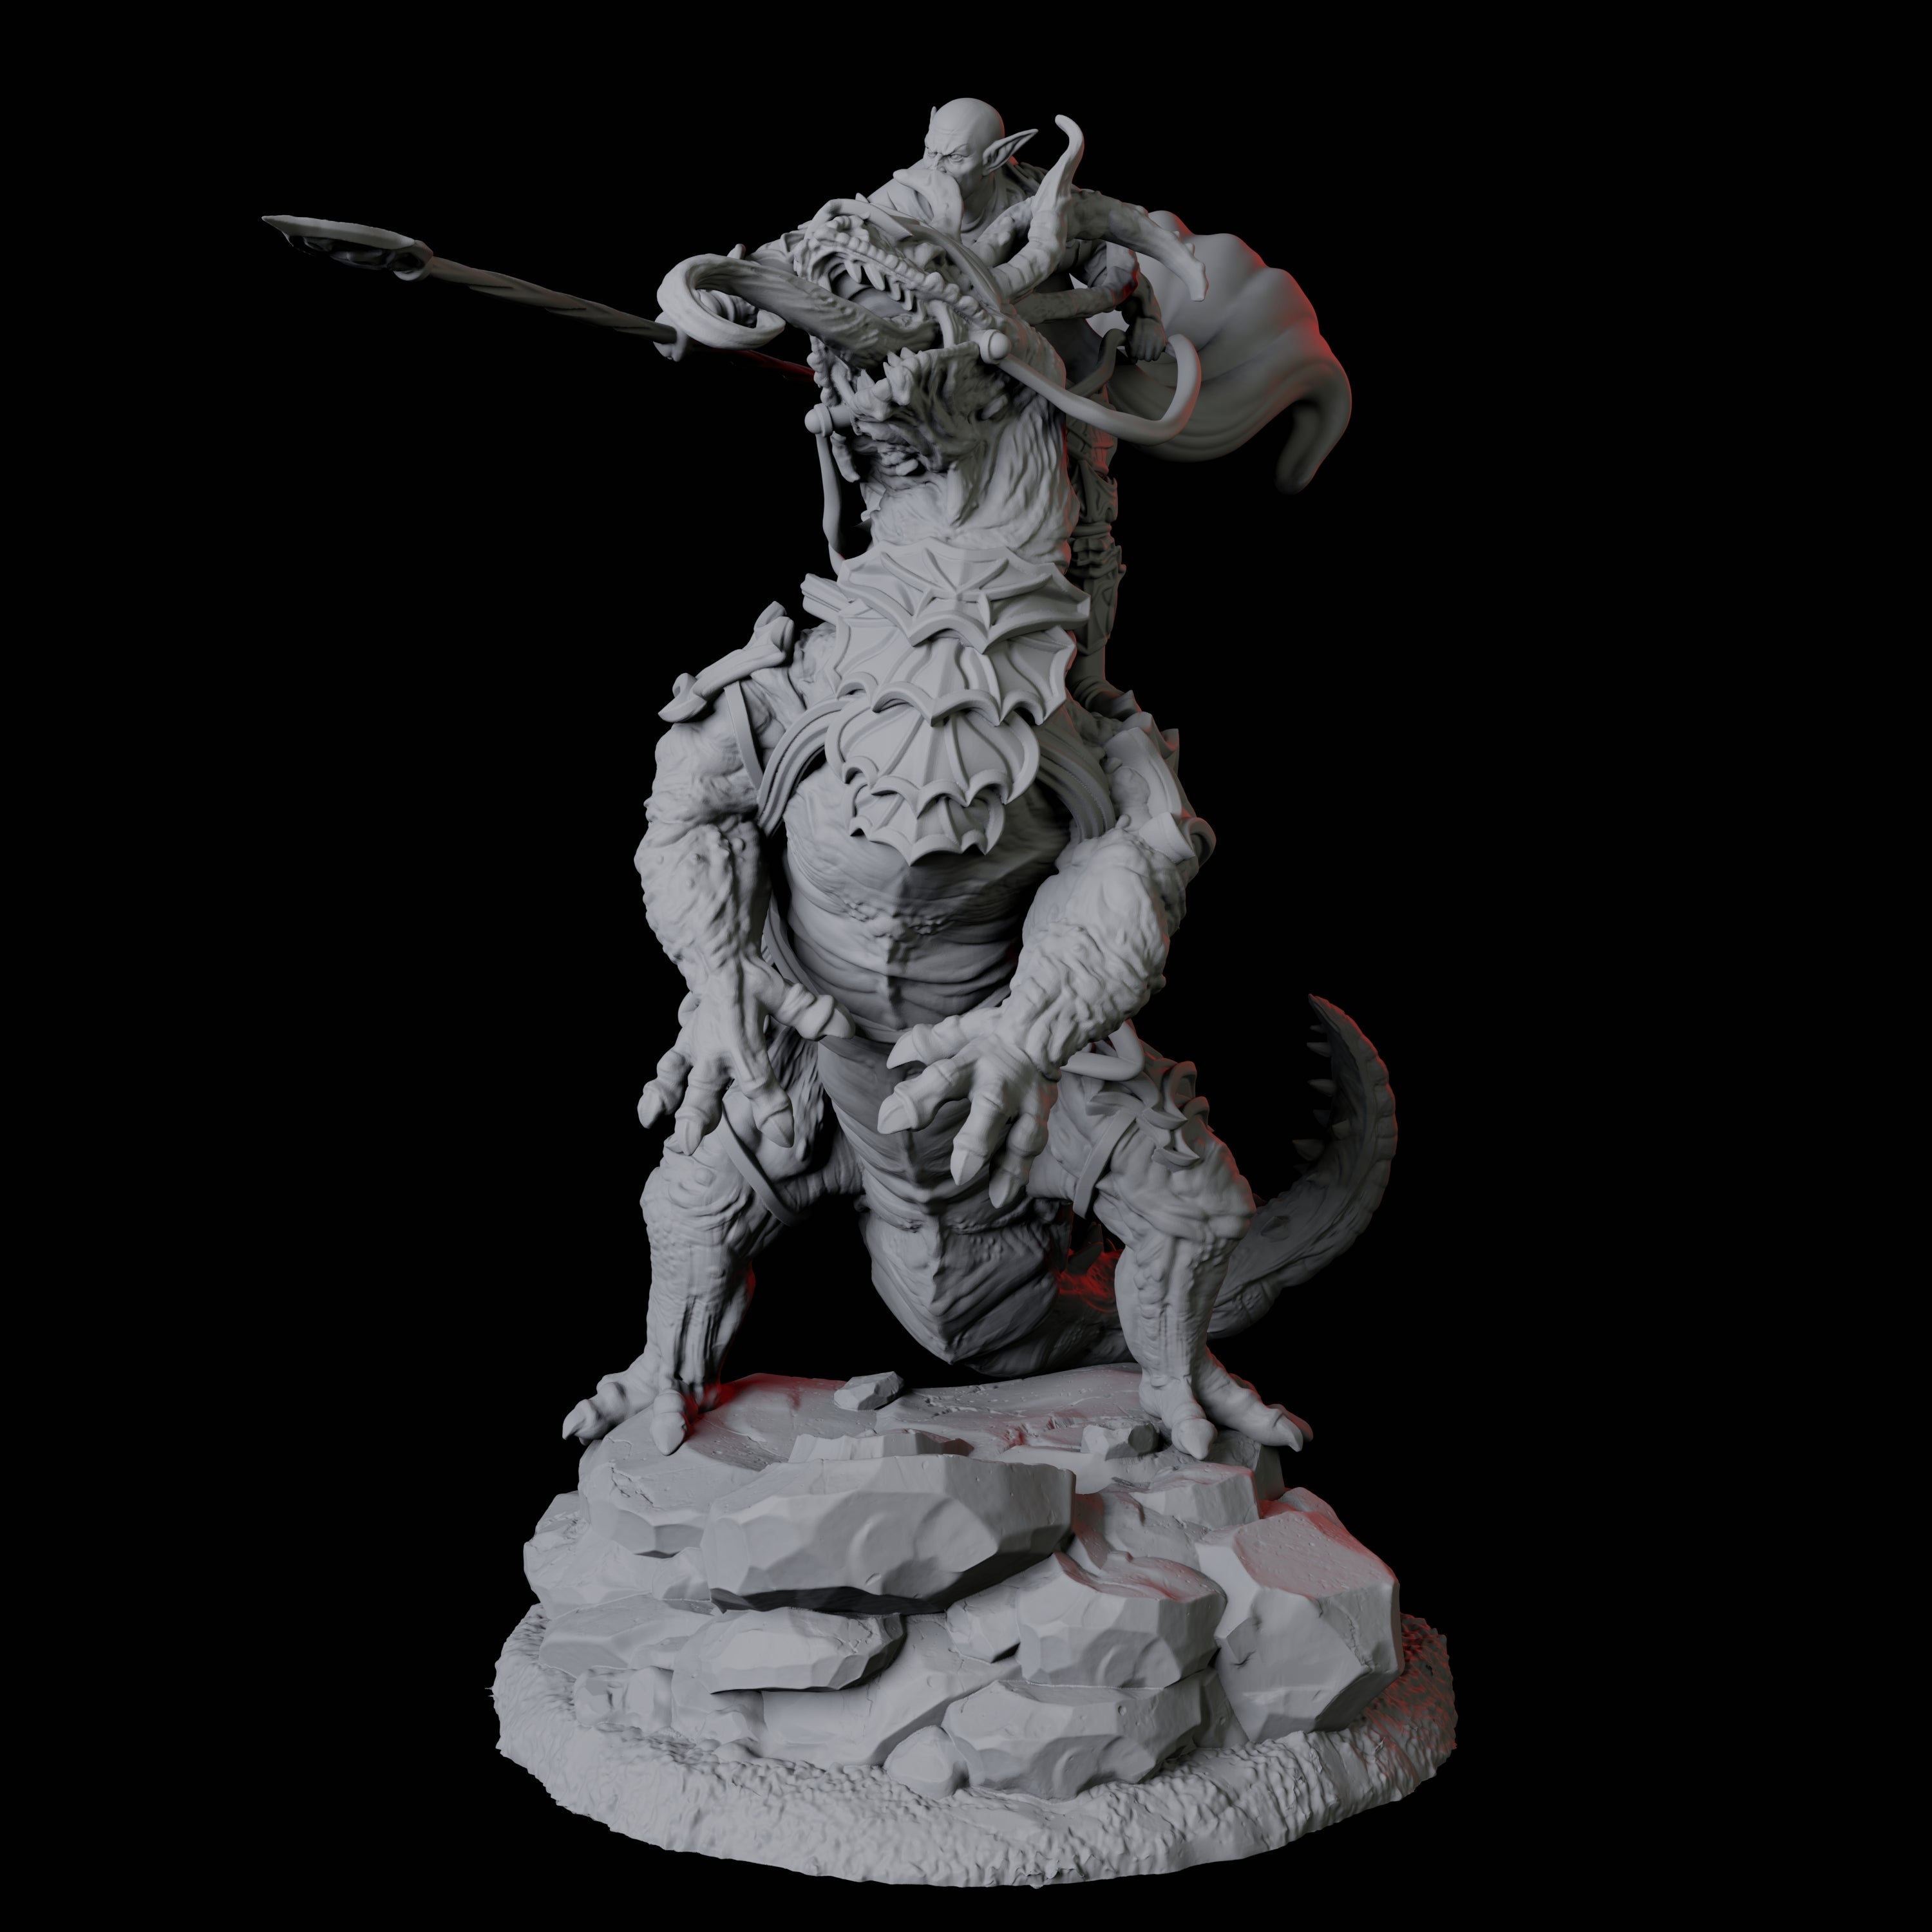 Fighter mounted on Giant Lizard D Miniature for Dungeons and Dragons, Pathfinder or other TTRPGs